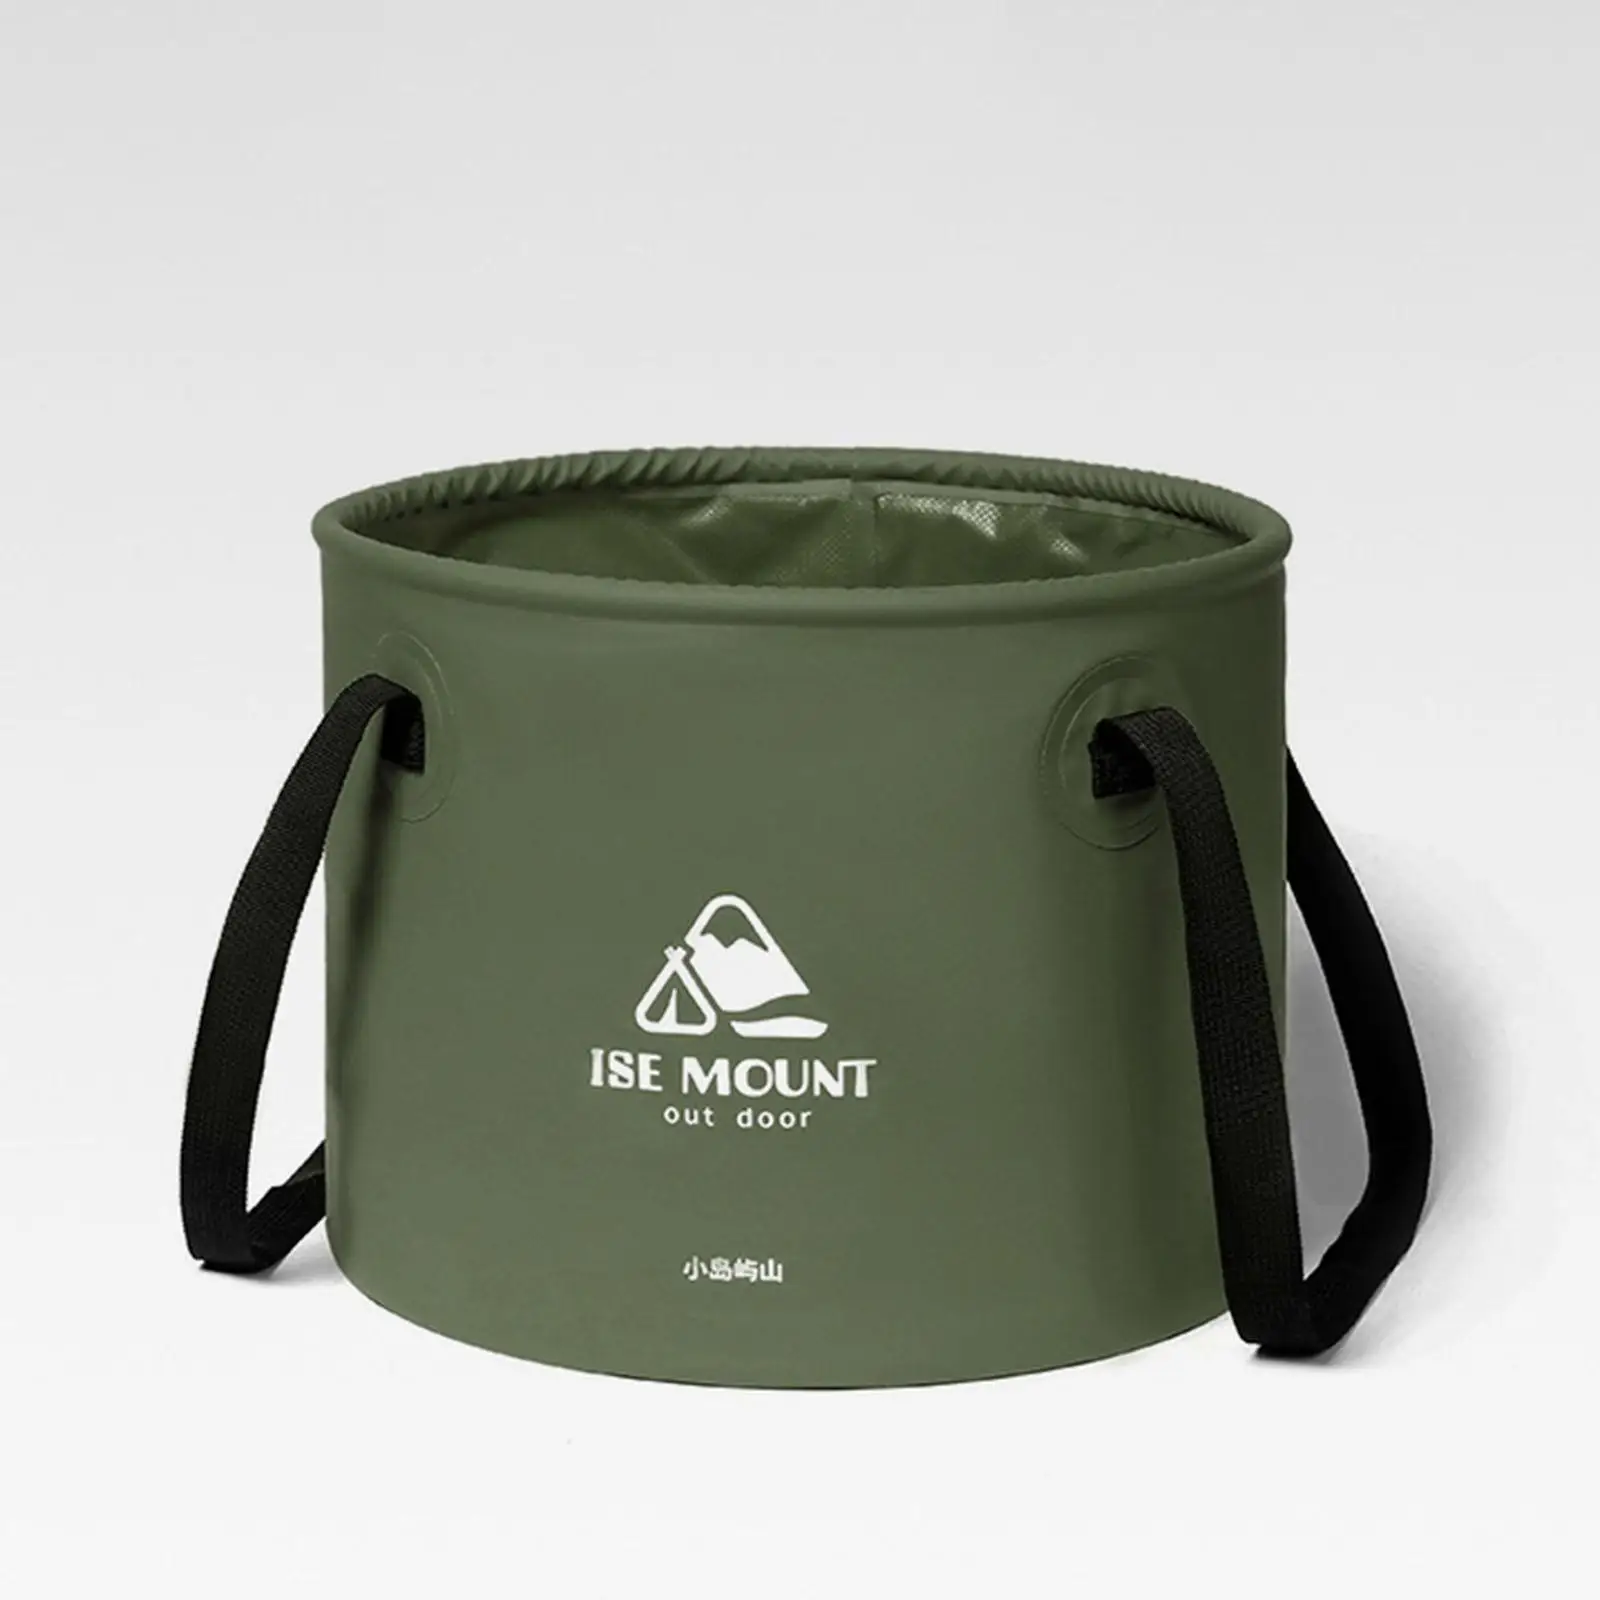 Outdoor Water Container Cleaning Bucket Dish Tub 20L Collapsible for Camping